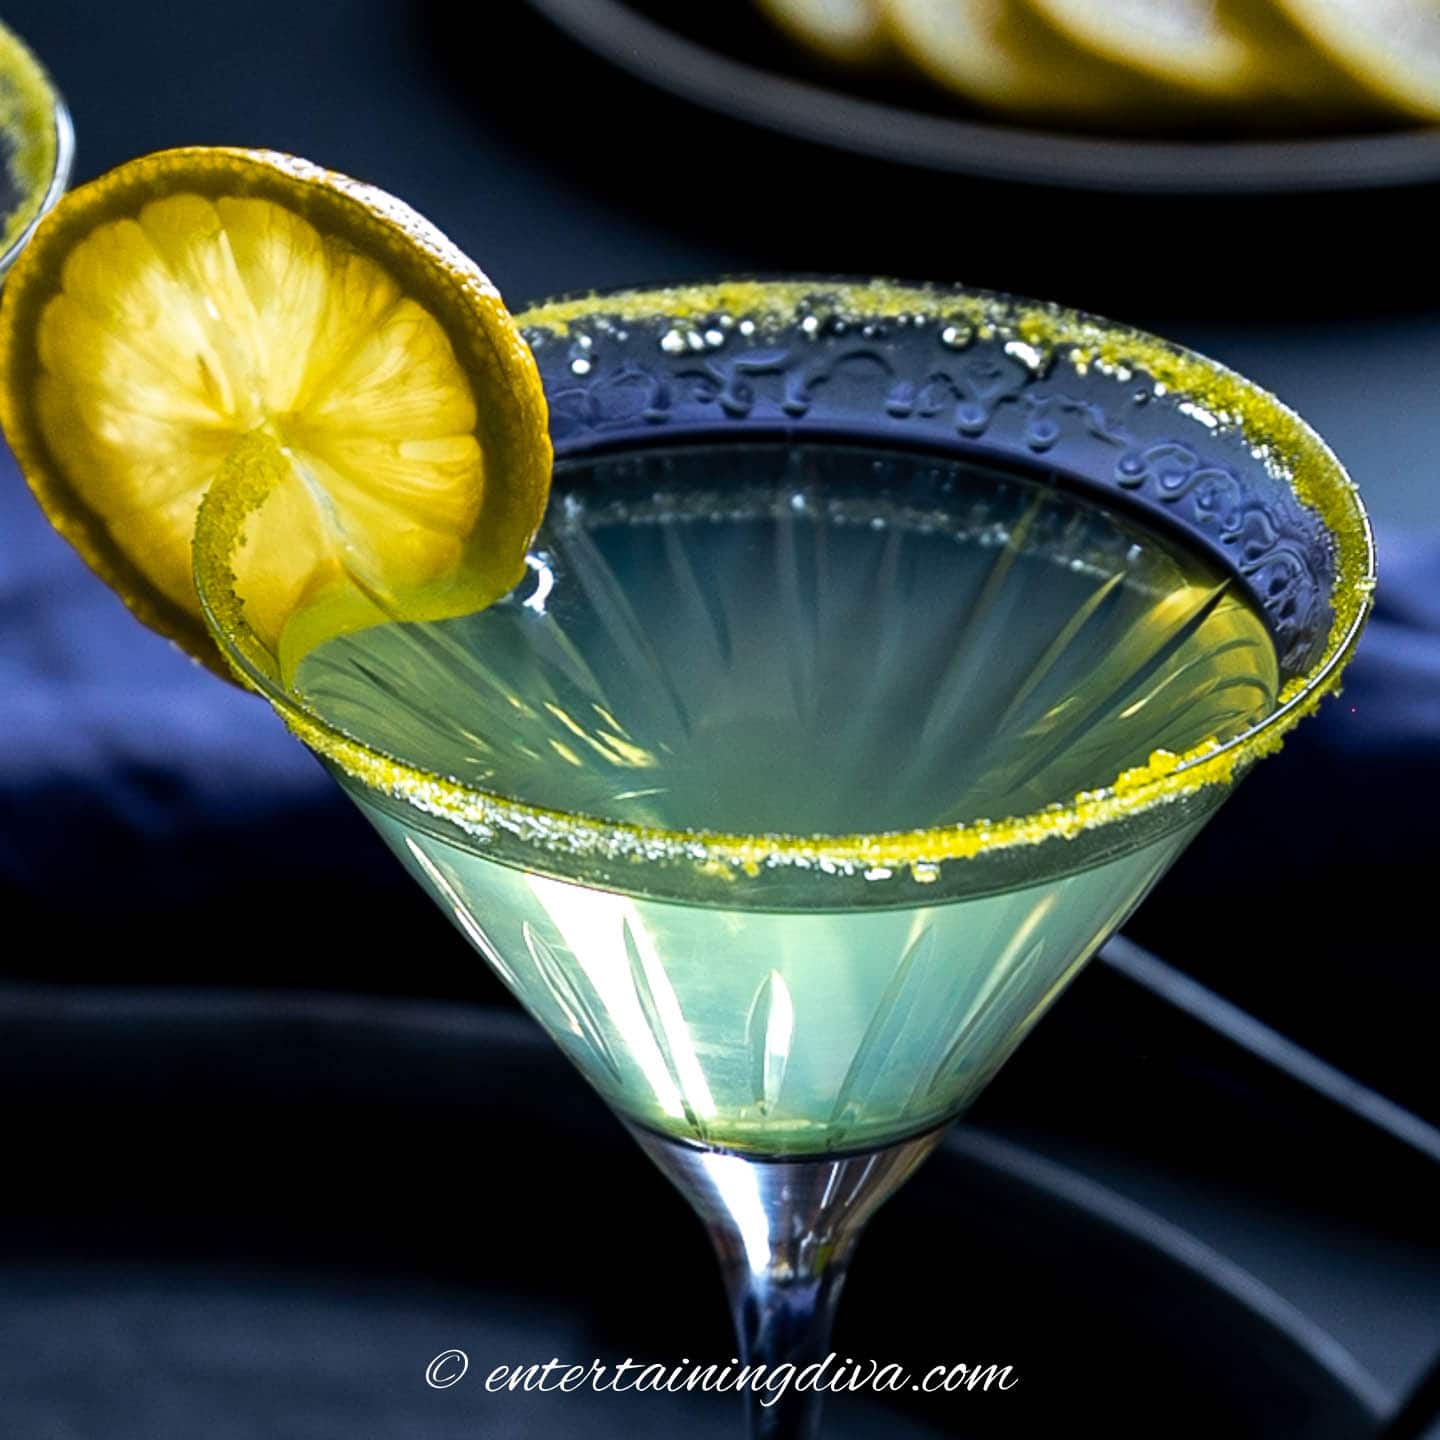 A limoncello martini with a rimmed glass and a slice of lemon garnish.